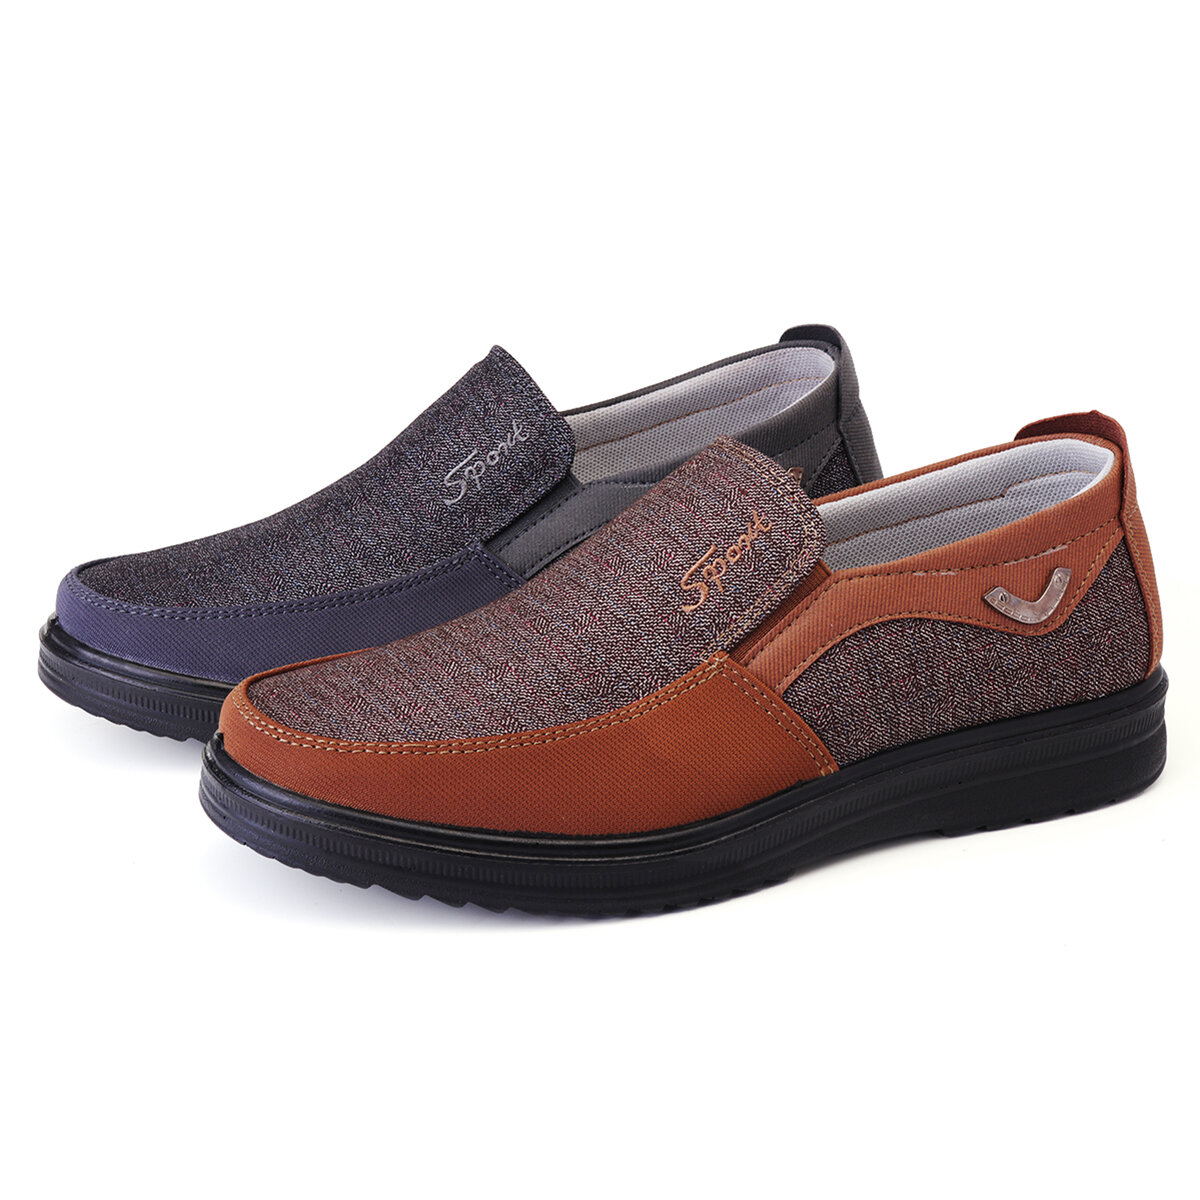 Image of Men's Casual Shoes Leather Round Toe Shoes Non-slip Breathable Outdoor Hiking Flat Shoes